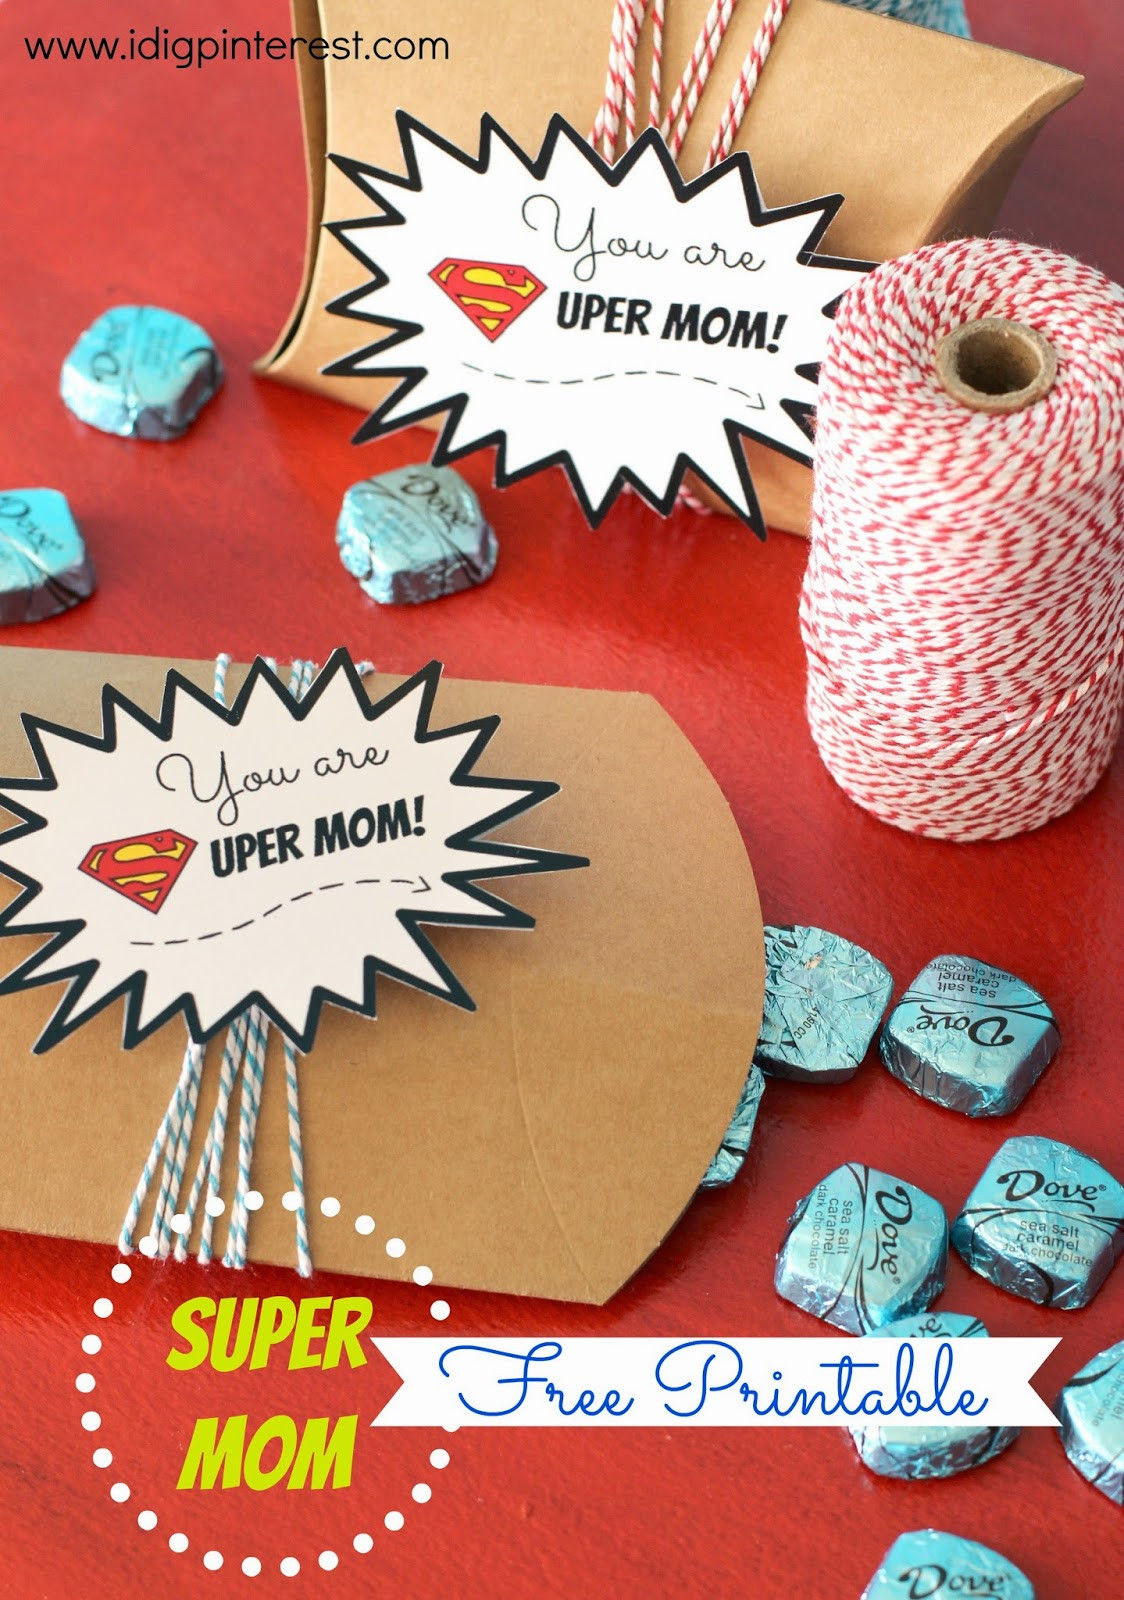 Mother'S Day Gift Ideas Pinterest
 "SUPER MOM" Mother s Day Gift Free Printable I Dig